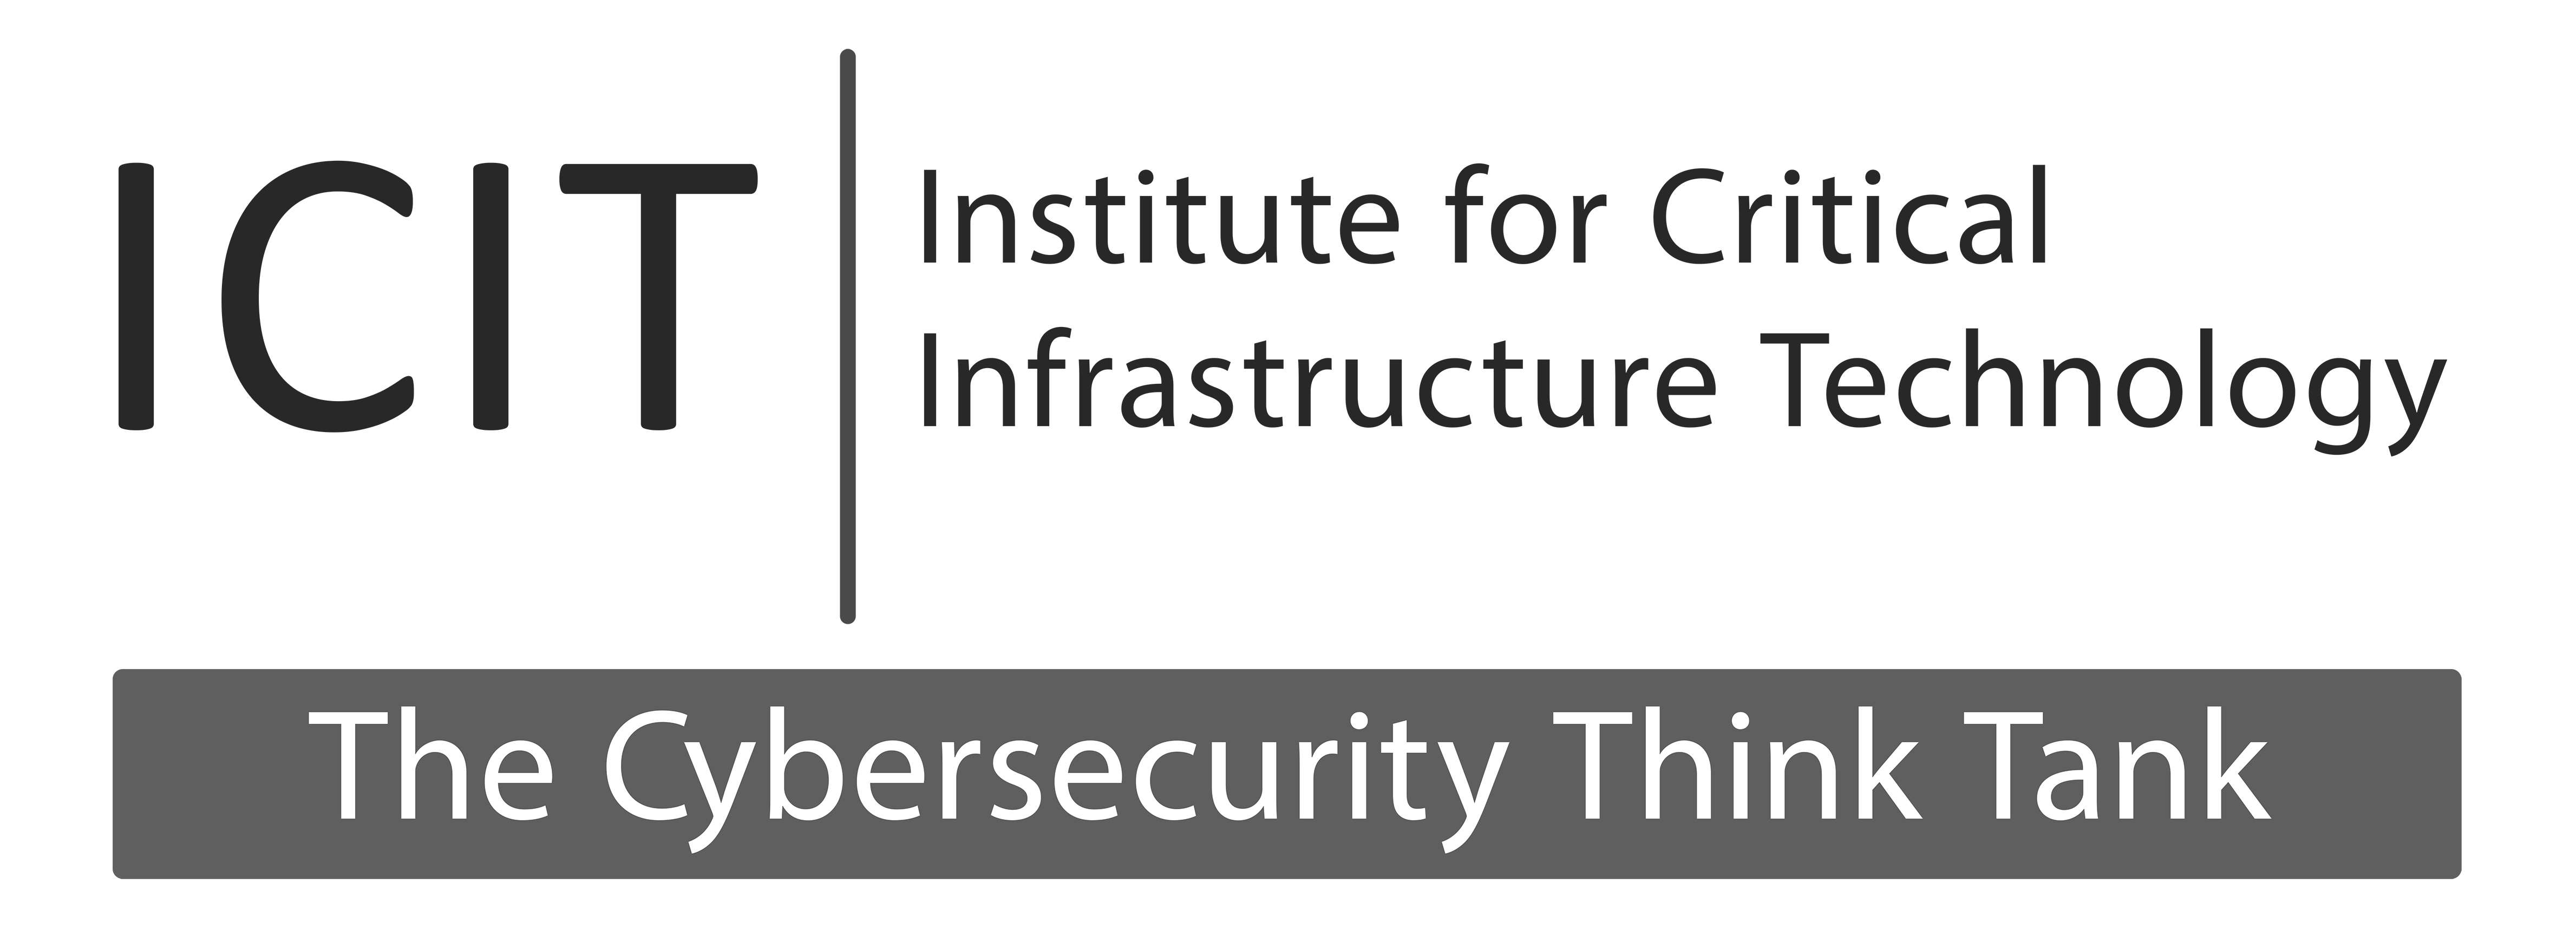 ICIT, a 501(c)(3), is America's non-partisan Cybersecurity Think Tank providing objective advisory to the legislative community, federal agencies and critical infrastructure leaders. Through cutting-edge research, publications and educational events, ICIT and its members are improving the resiliency of our nation's critical infrastructure sectors. www.icitech.org ﻿ 